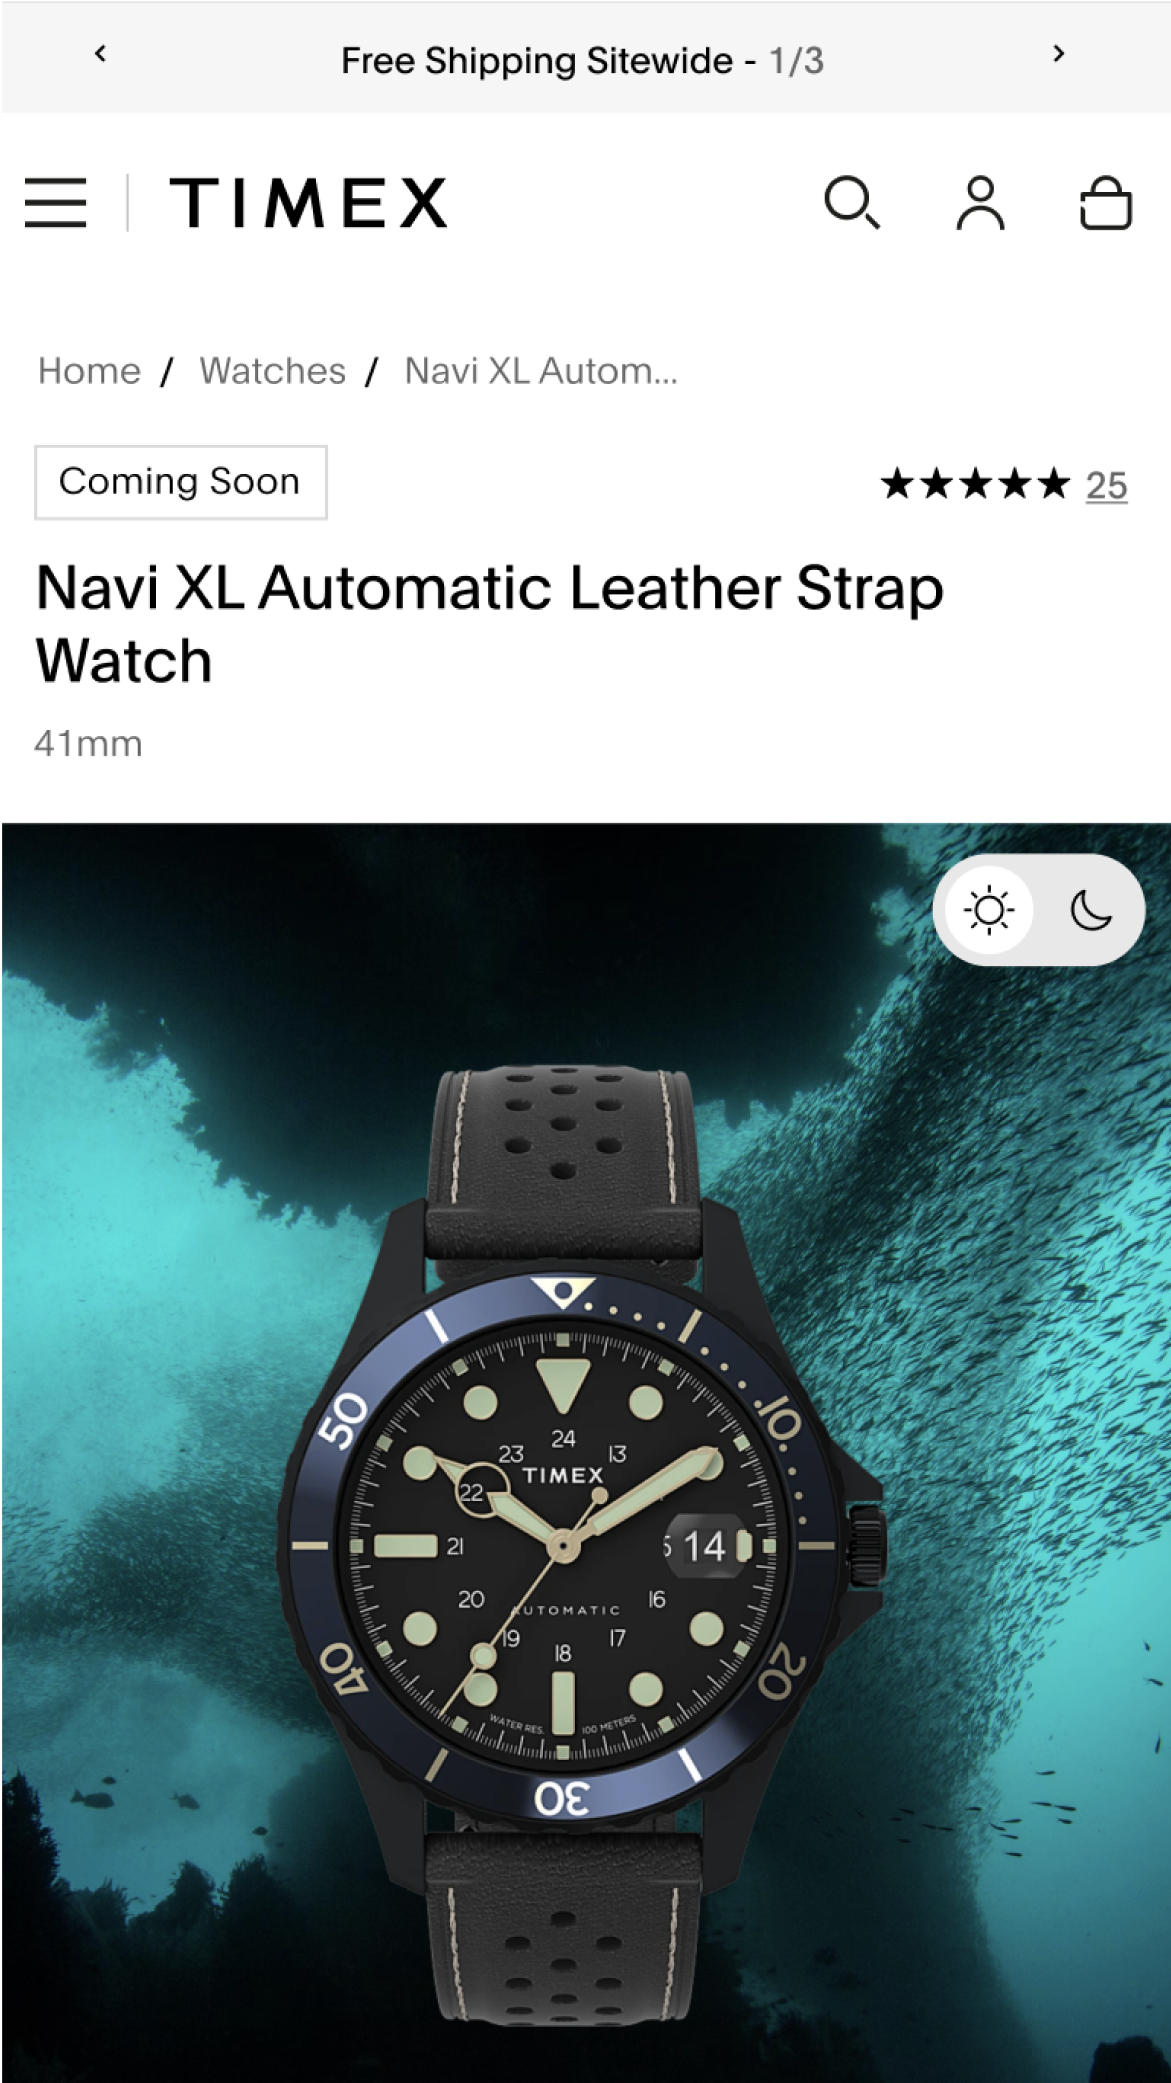 Mobile screenshot of a product page on Timex's site